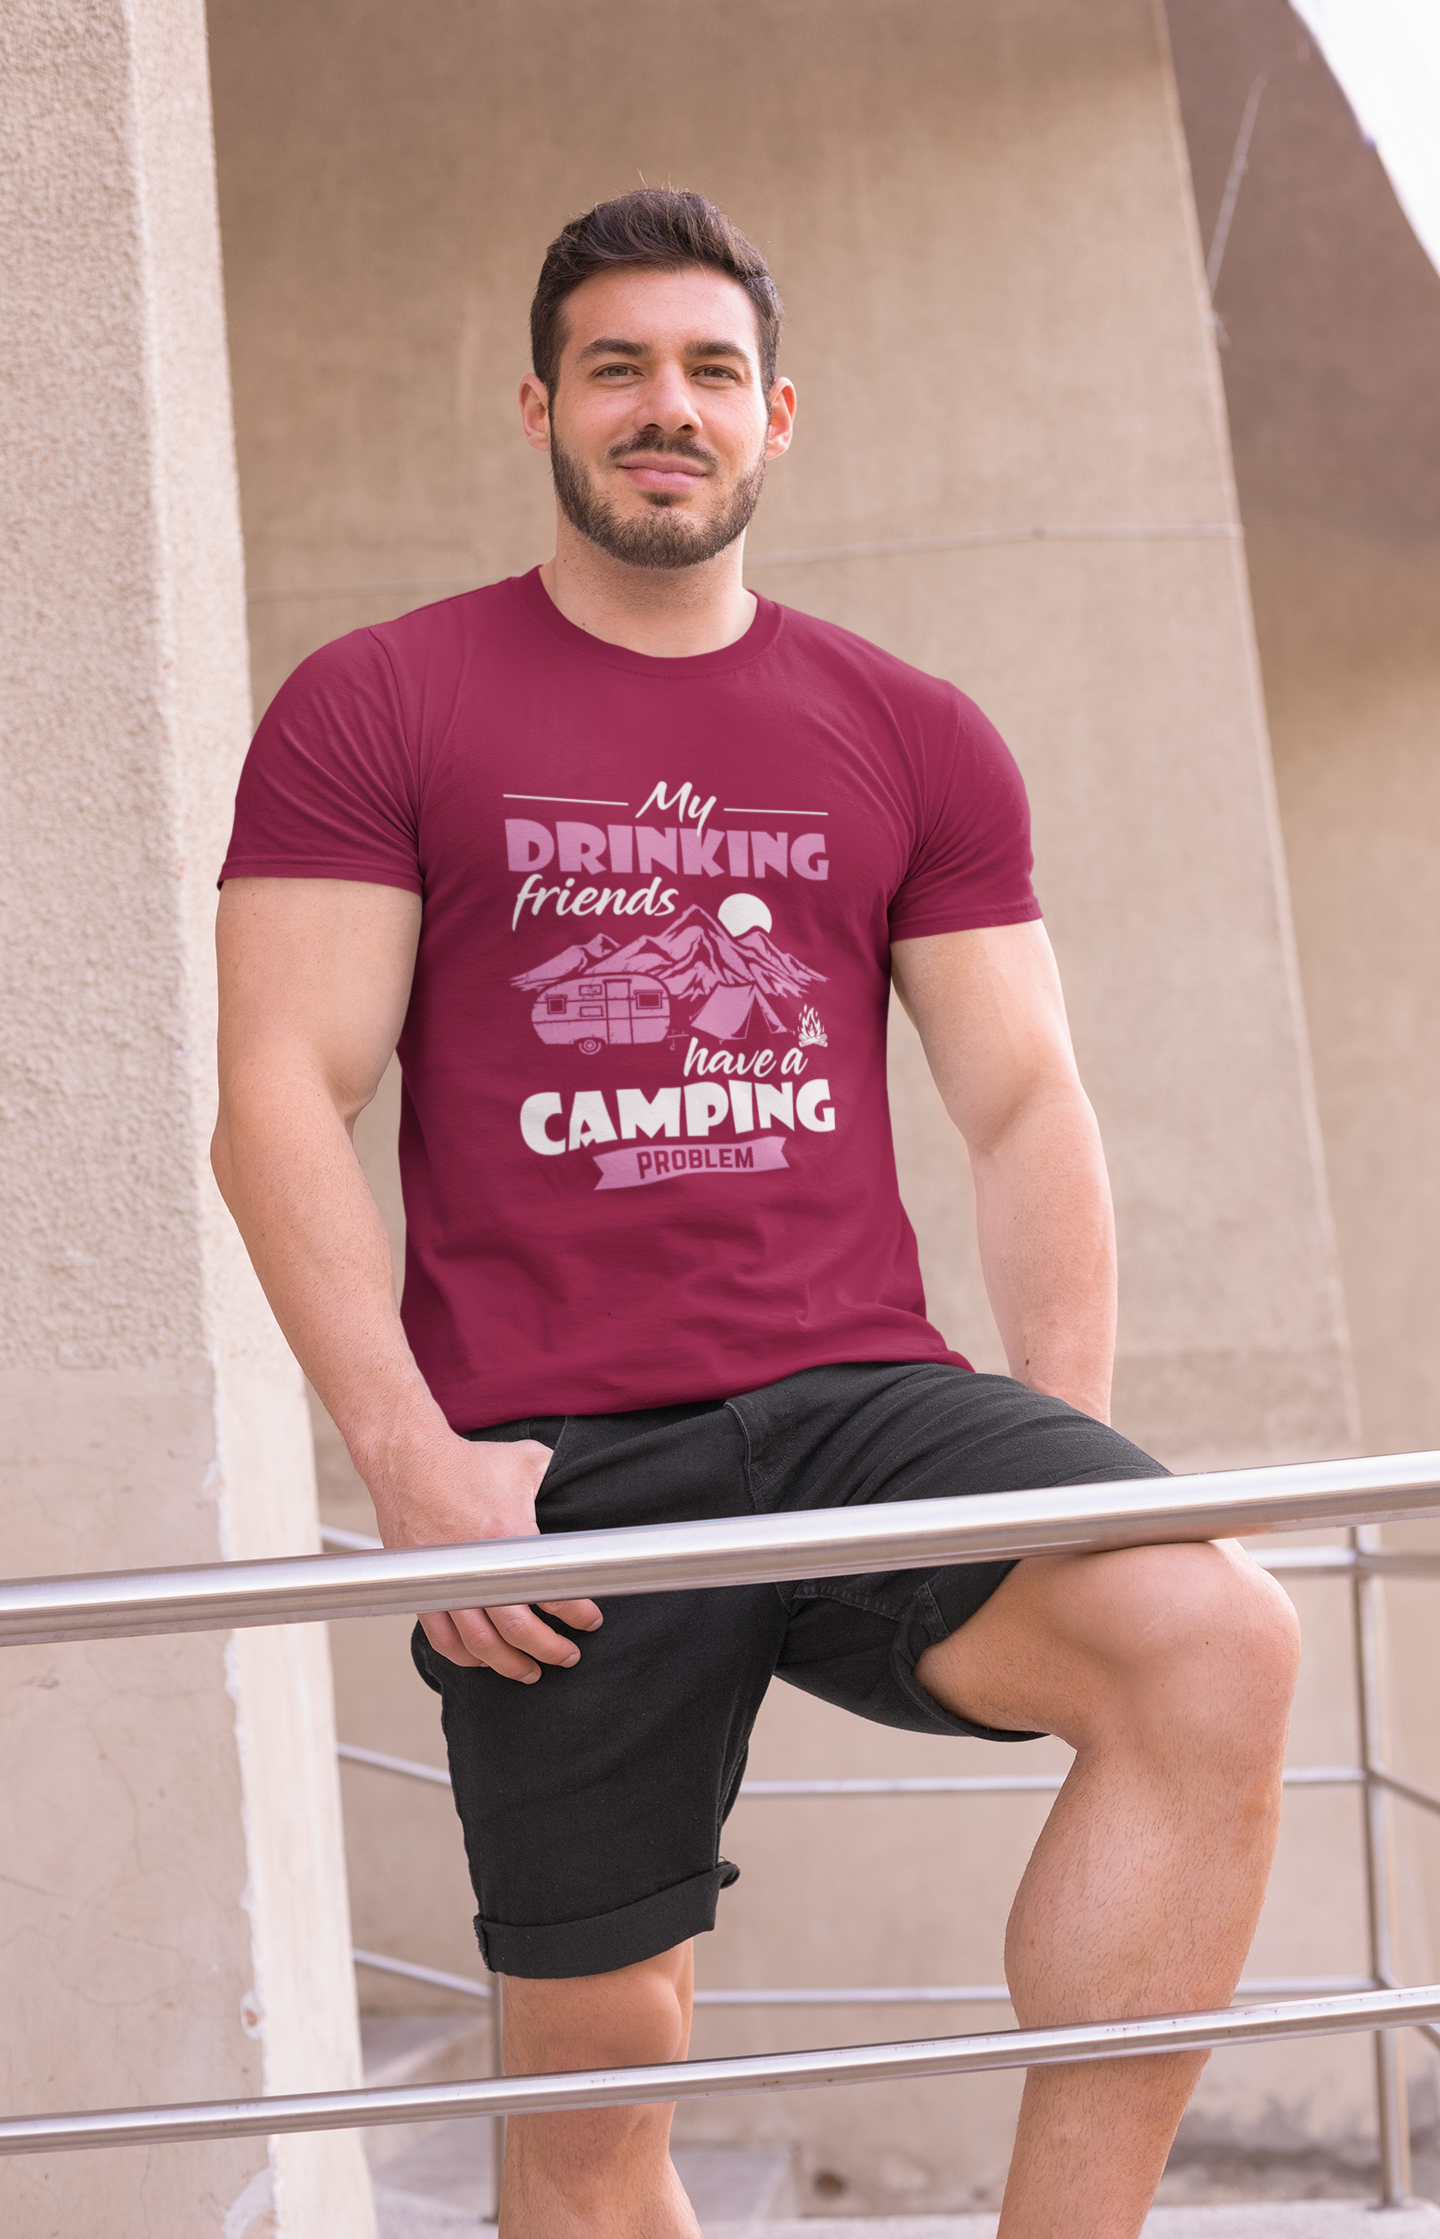 Drinking friends have Camping problem , ;  100% cotton Tee Removable tag for comfort